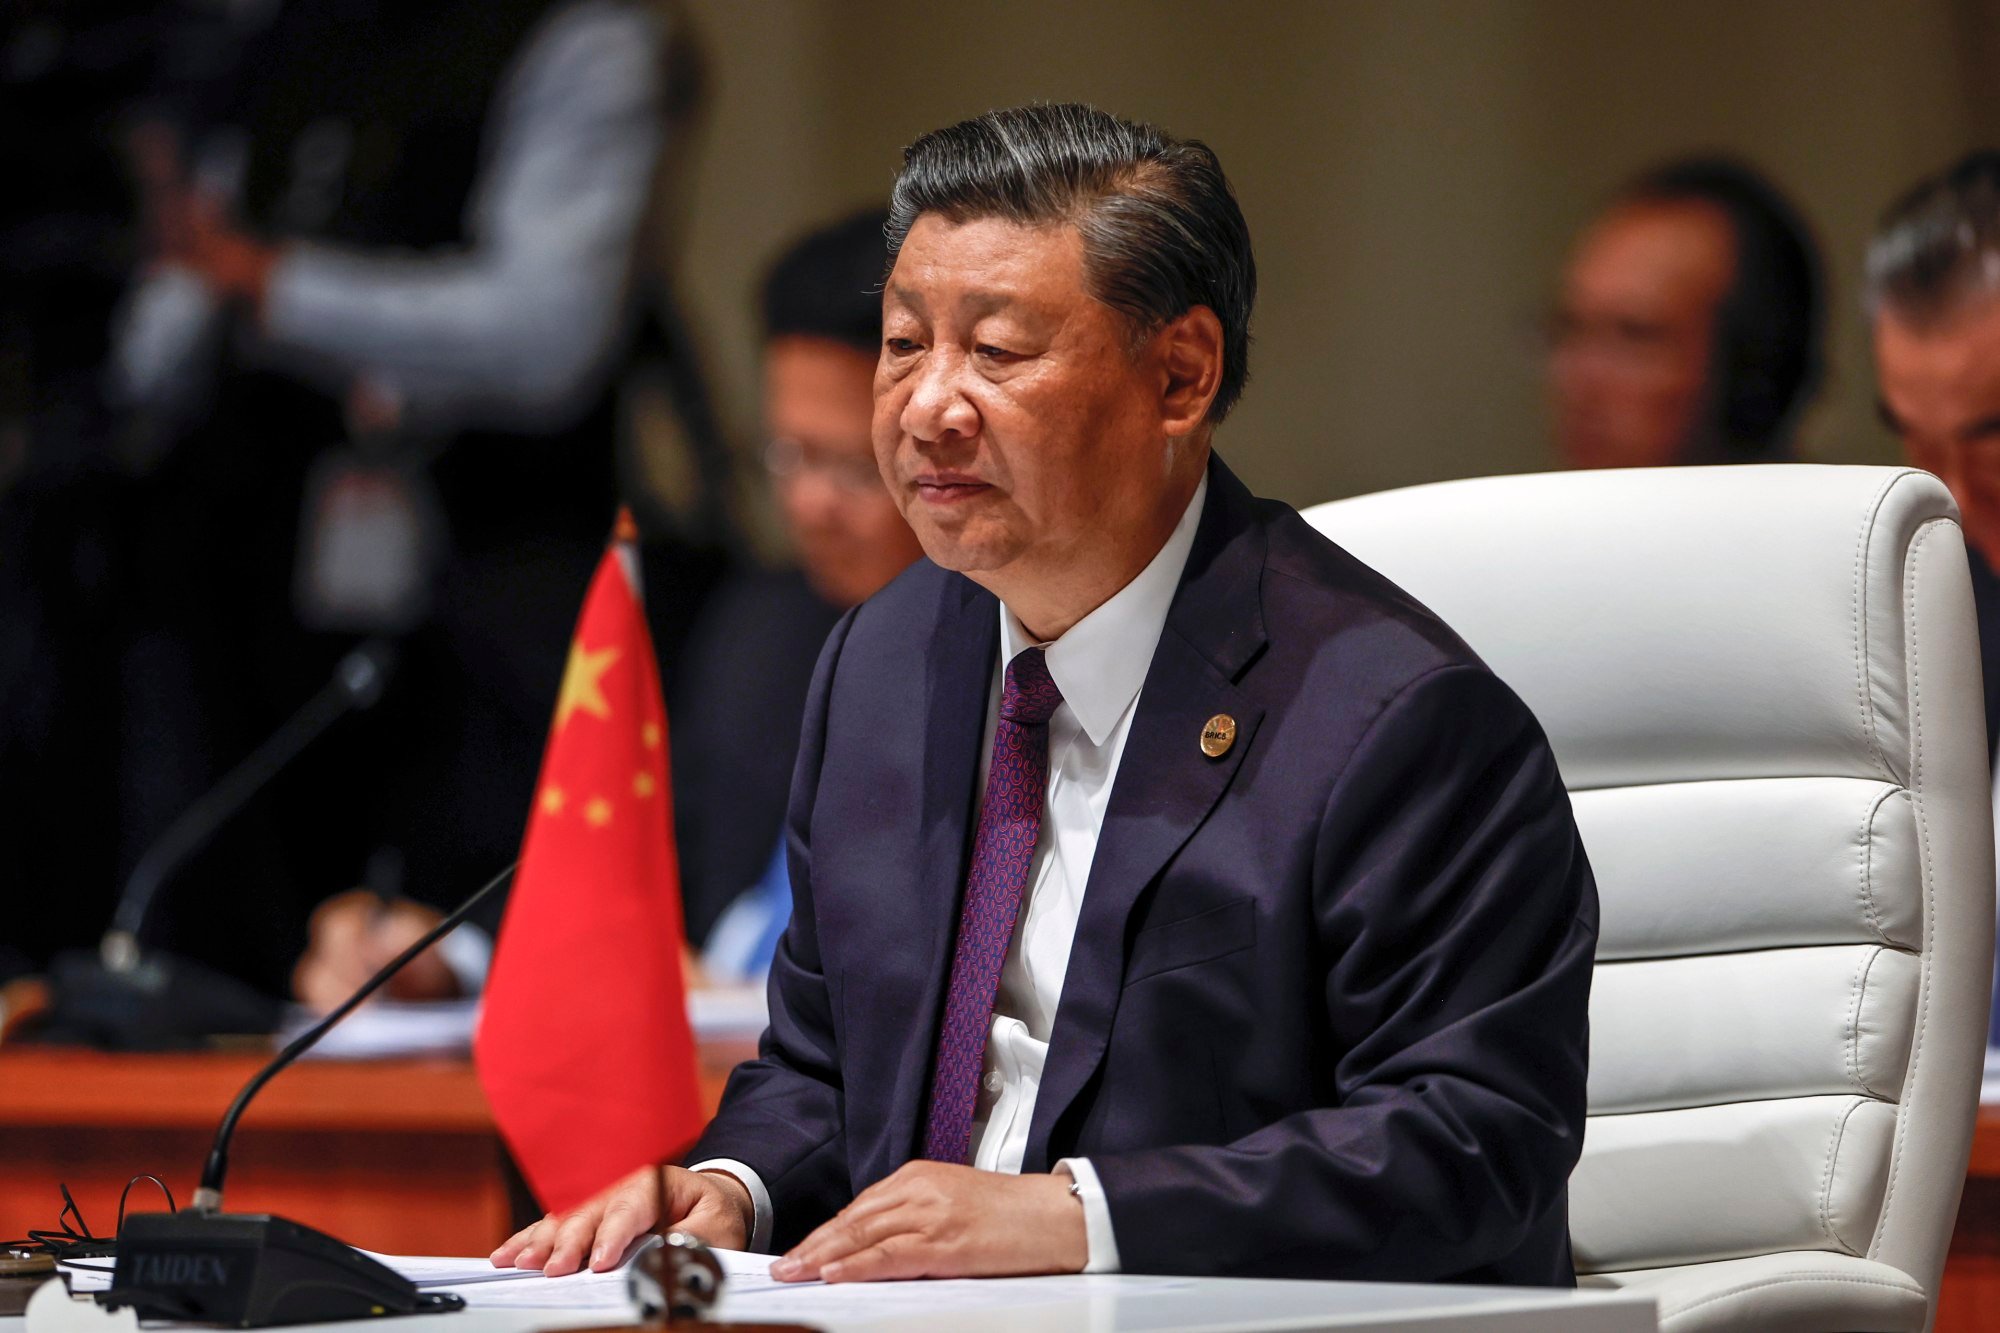 Chinese President Xi Jinping said international rules should not be dictated by those with the strongest muscles or loudest voices. Photo: EPA-EFE